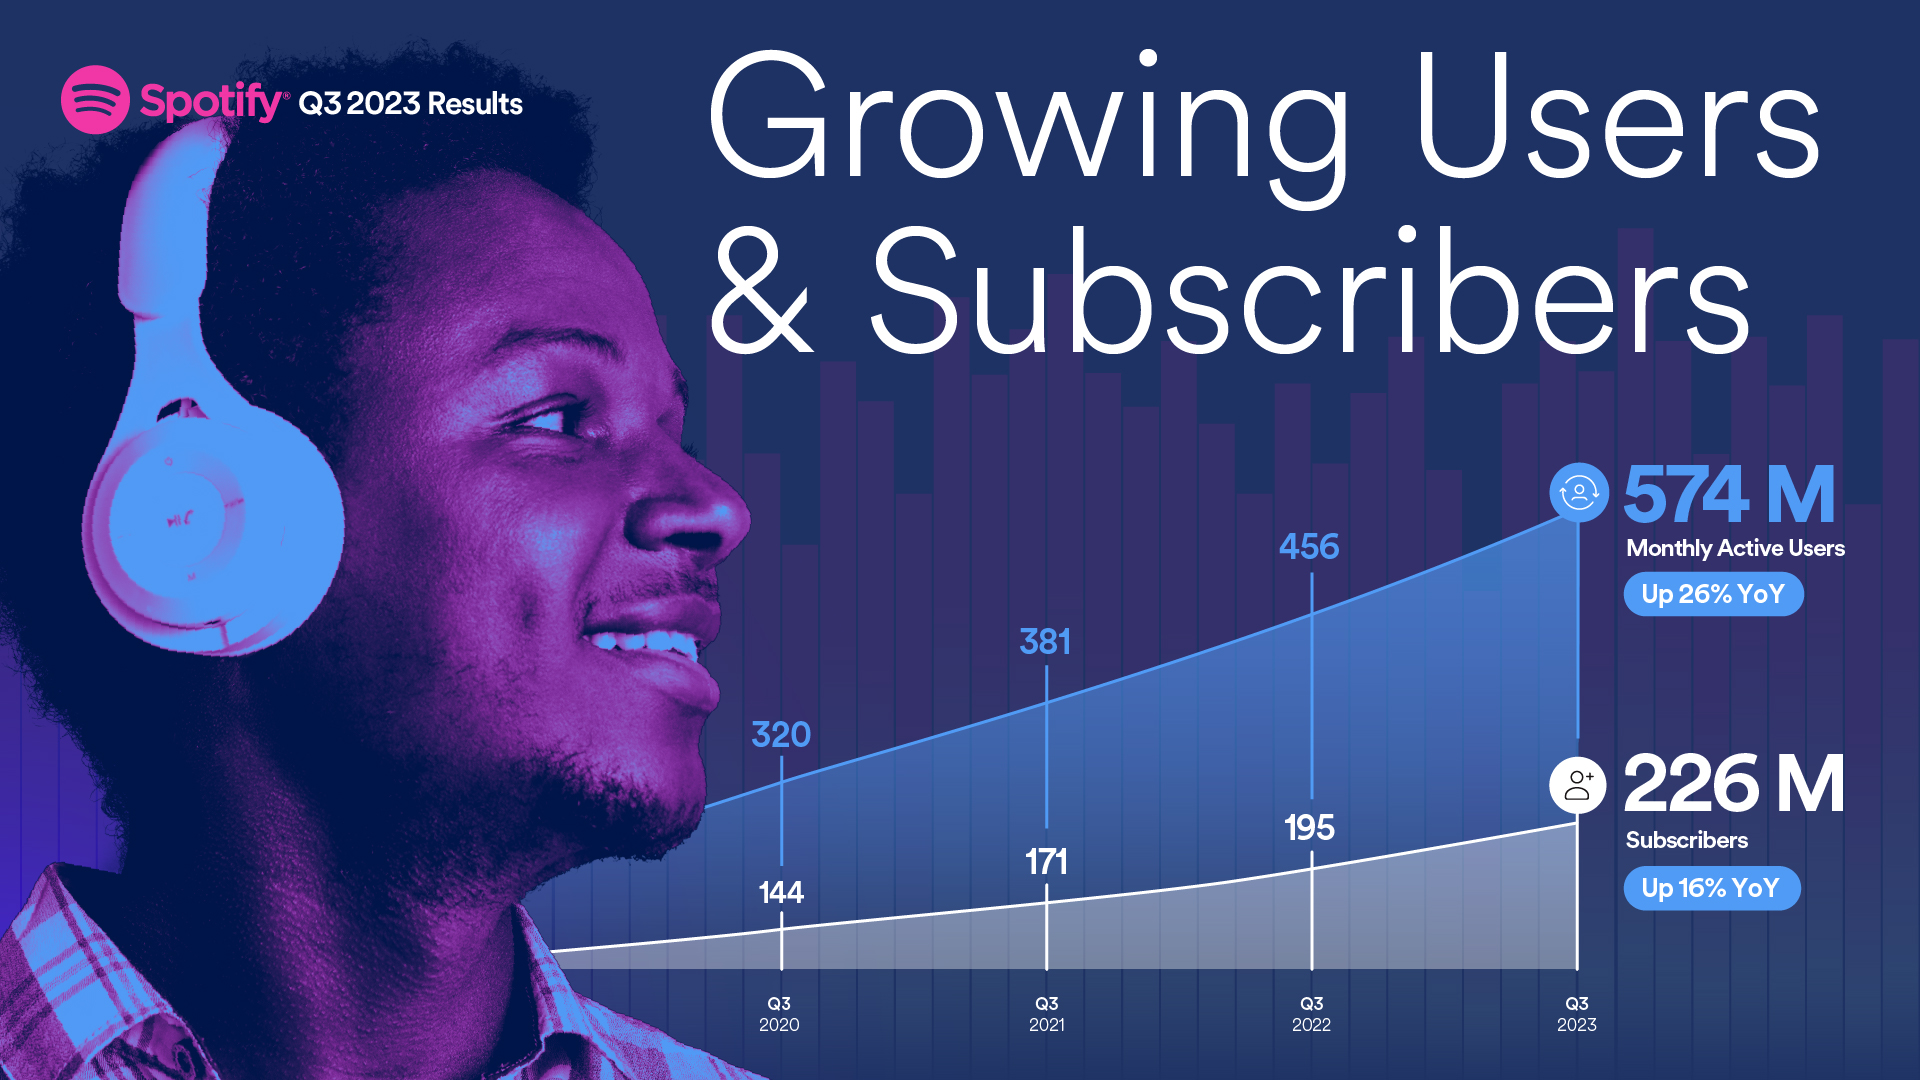 Spotify Q3 2023 Results - Growing Users & Subscribers